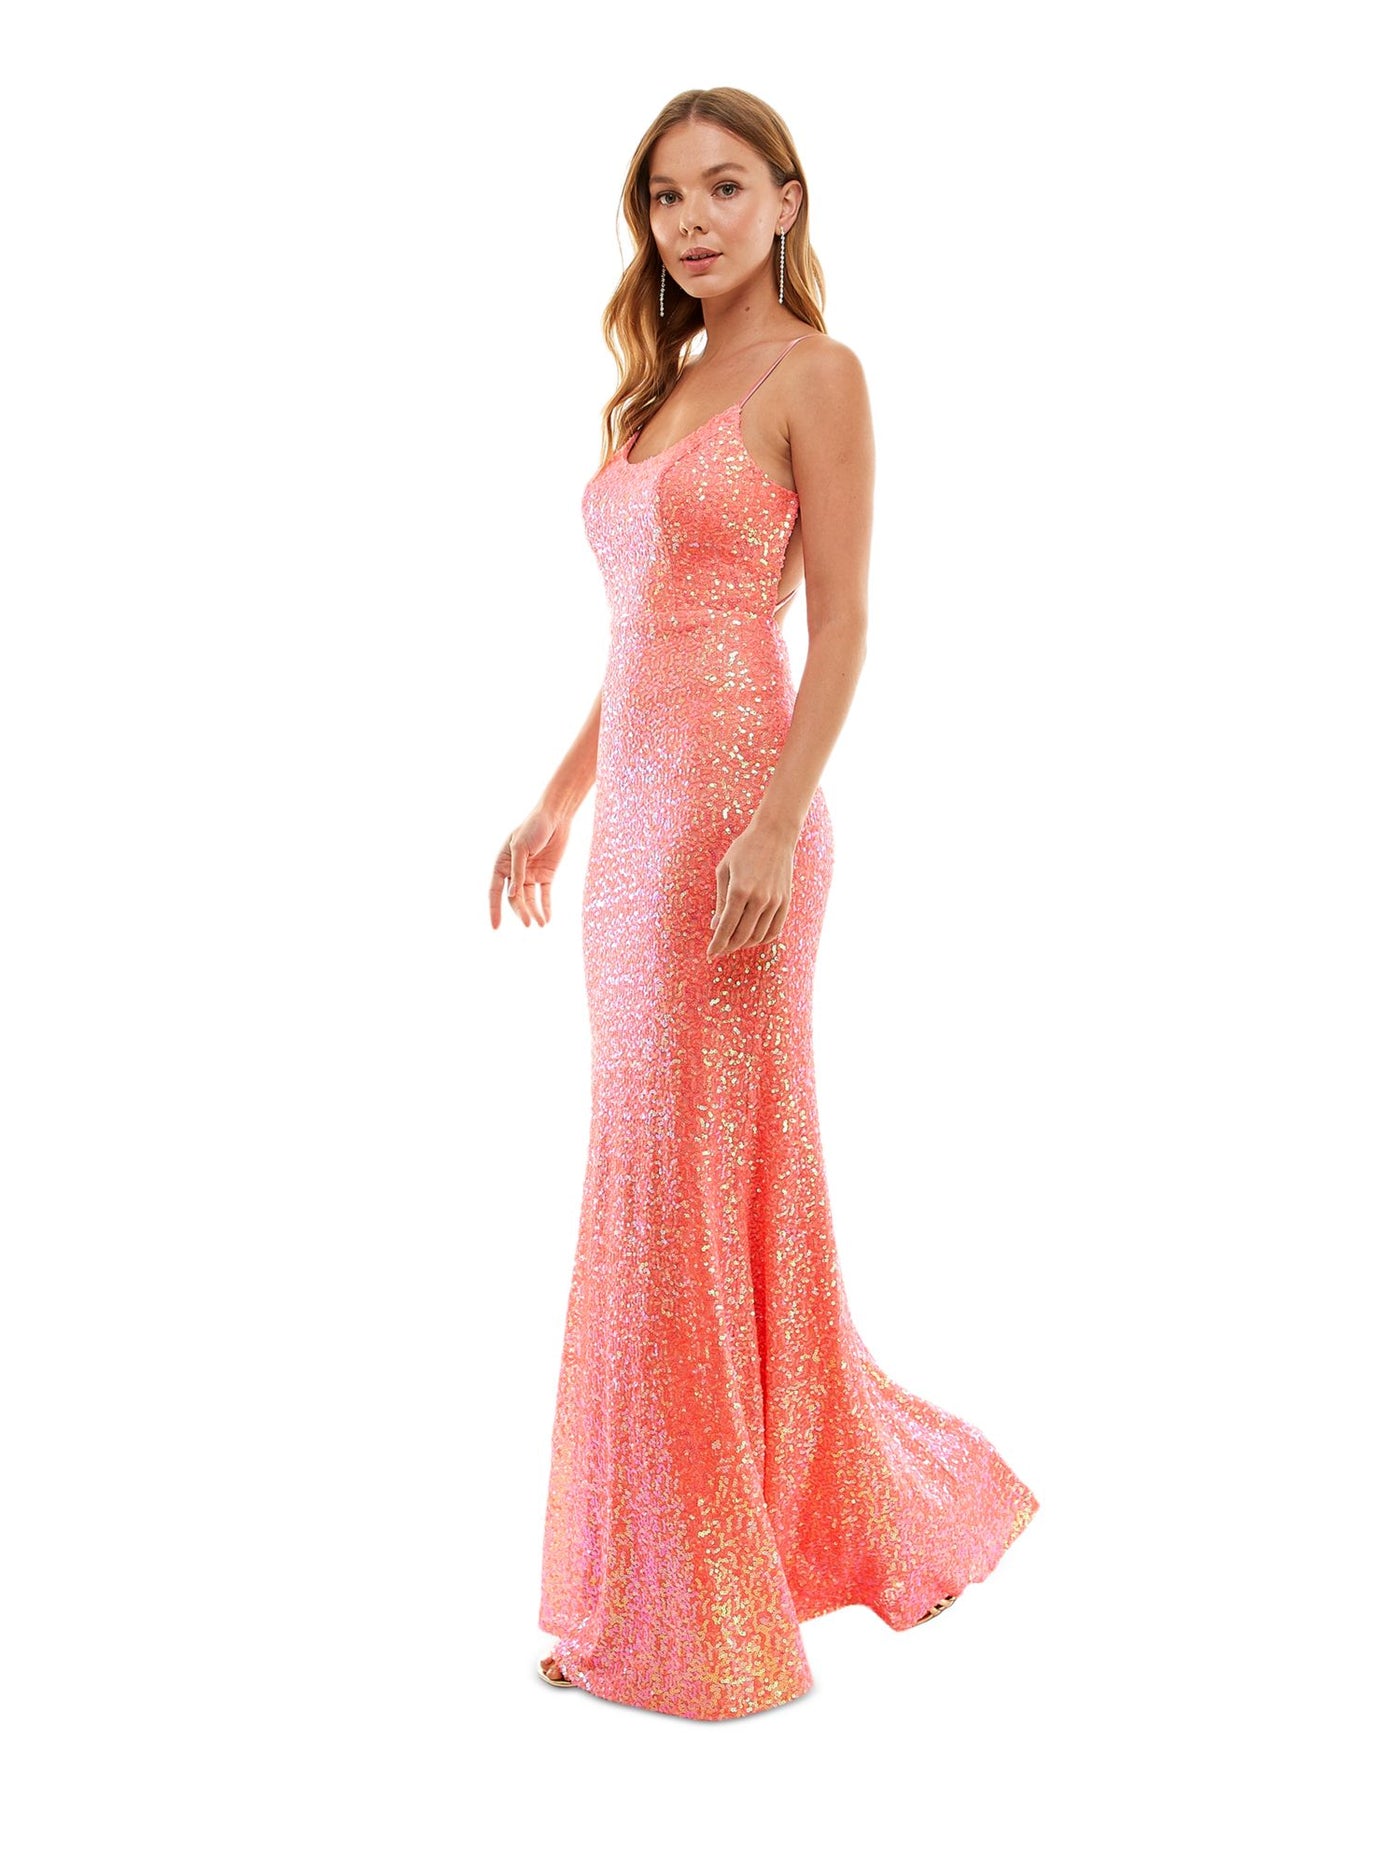 CITY STUDIO Womens Coral Zippered Lined Strappy Open Back Spaghetti Strap Scoop Neck Full-Length Prom Gown Dress Juniors 7